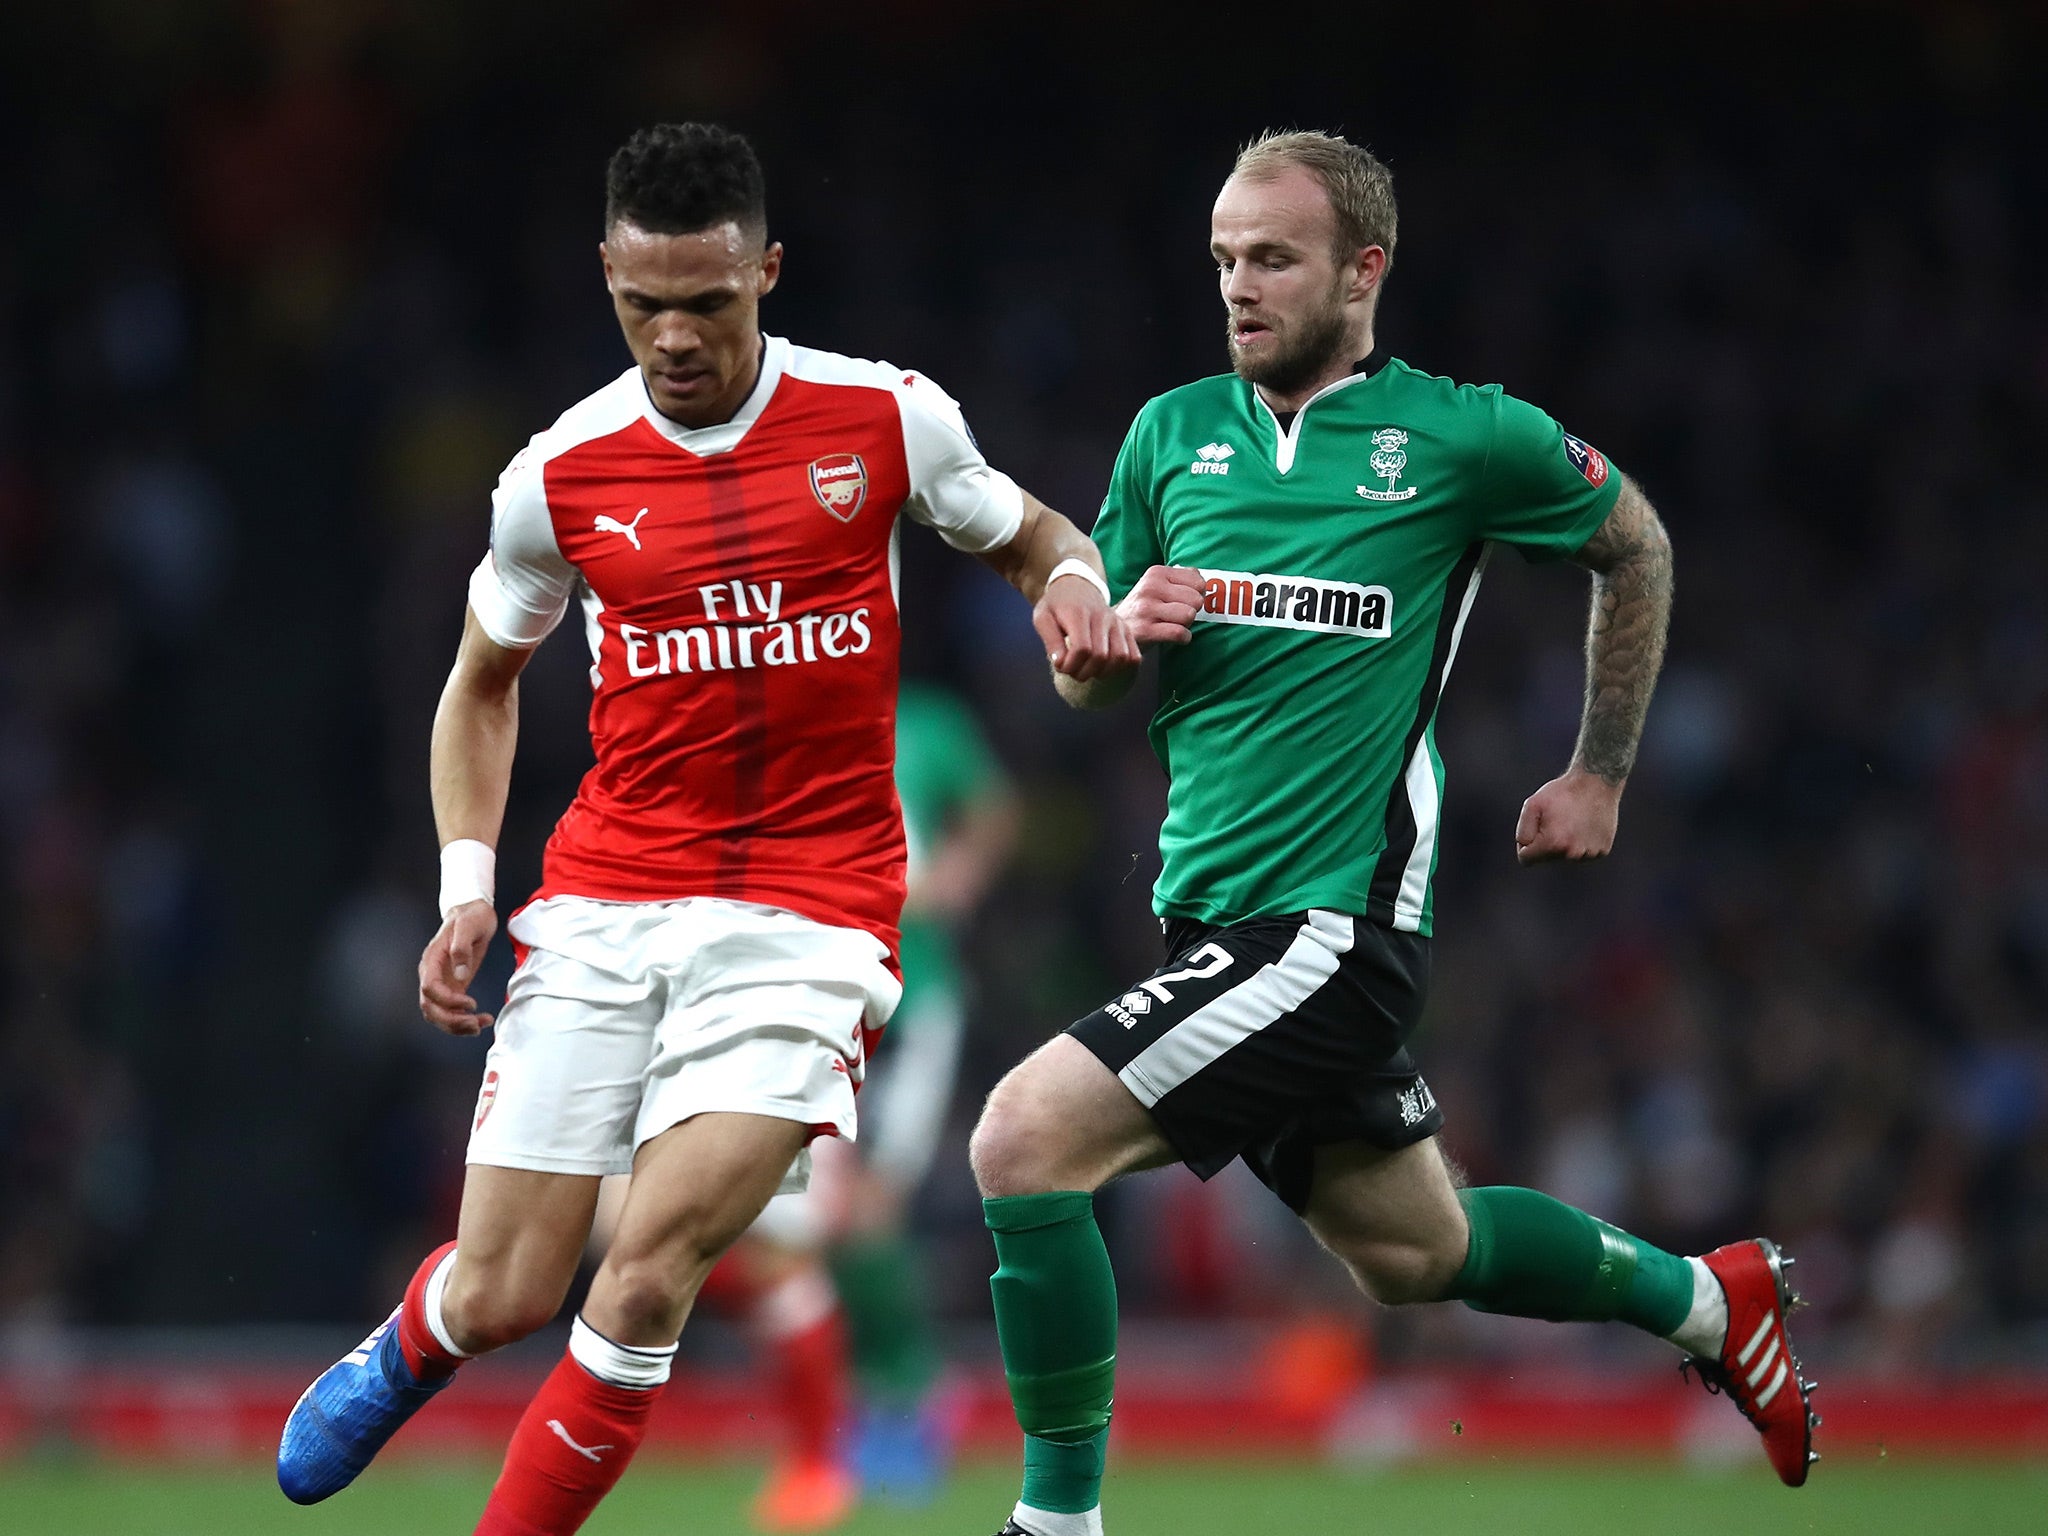 Kieran Gibbs and Bradley Wood battle for the ball at the Emirates